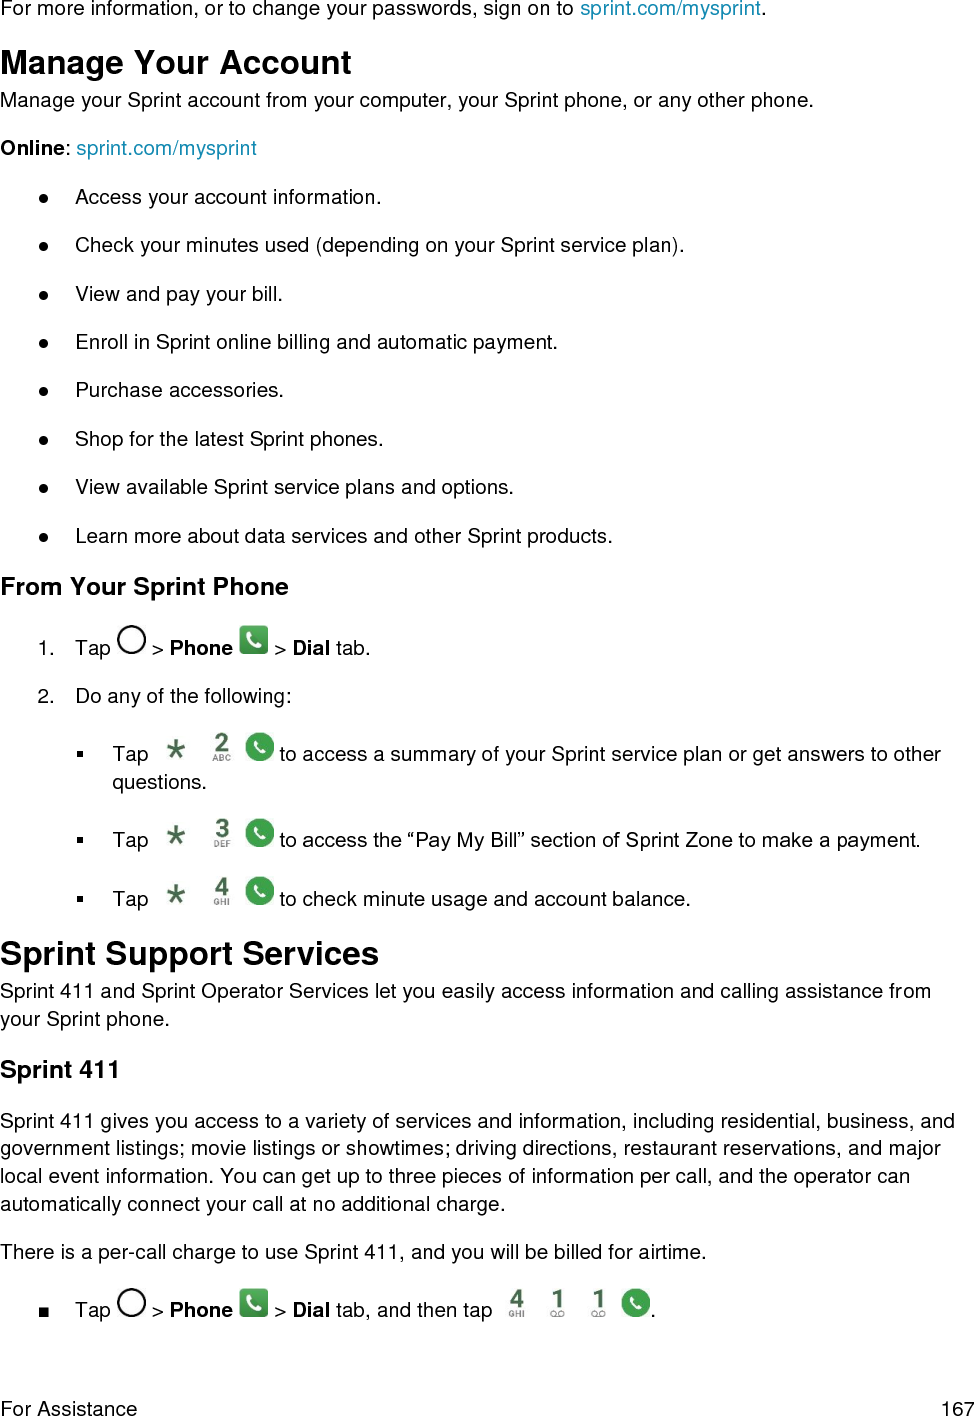 For Assistance  167 For more information, or to change your passwords, sign on to sprint.com/mysprint. Manage Your Account Manage your Sprint account from your computer, your Sprint phone, or any other phone. Online: sprint.com/mysprint ●Access your account information.●Check your minutes used (depending on your Sprint service plan).●View and pay your bill.●Enroll in Sprint online billing and automatic payment.●Purchase accessories.●Shop for the latest Sprint phones.●View available Sprint service plans and options.●Learn more about data services and other Sprint products.From Your Sprint Phone 1. Tap  &gt; Phone   &gt; Dial tab. 2. Do any of the following:Tap  to access a summary of your Sprint service plan or get answers to other questions.Tap  to access the “Pay My Bill” section of Sprint Zone to make a payment. Tap  to check minute usage and account balance. Sprint Support Services Sprint 411 and Sprint Operator Services let you easily access information and calling assistance from your Sprint phone. Sprint 411 Sprint 411 gives you access to a variety of services and information, including residential, business, and government listings; movie listings or showtimes; driving directions, restaurant reservations, and major local event information. You can get up to three pieces of information per call, and the operator can automatically connect your call at no additional charge. There is a per-call charge to use Sprint 411, and you will be billed for airtime. ■Tap  &gt; Phone   &gt; Dial tab, and then tap  . 